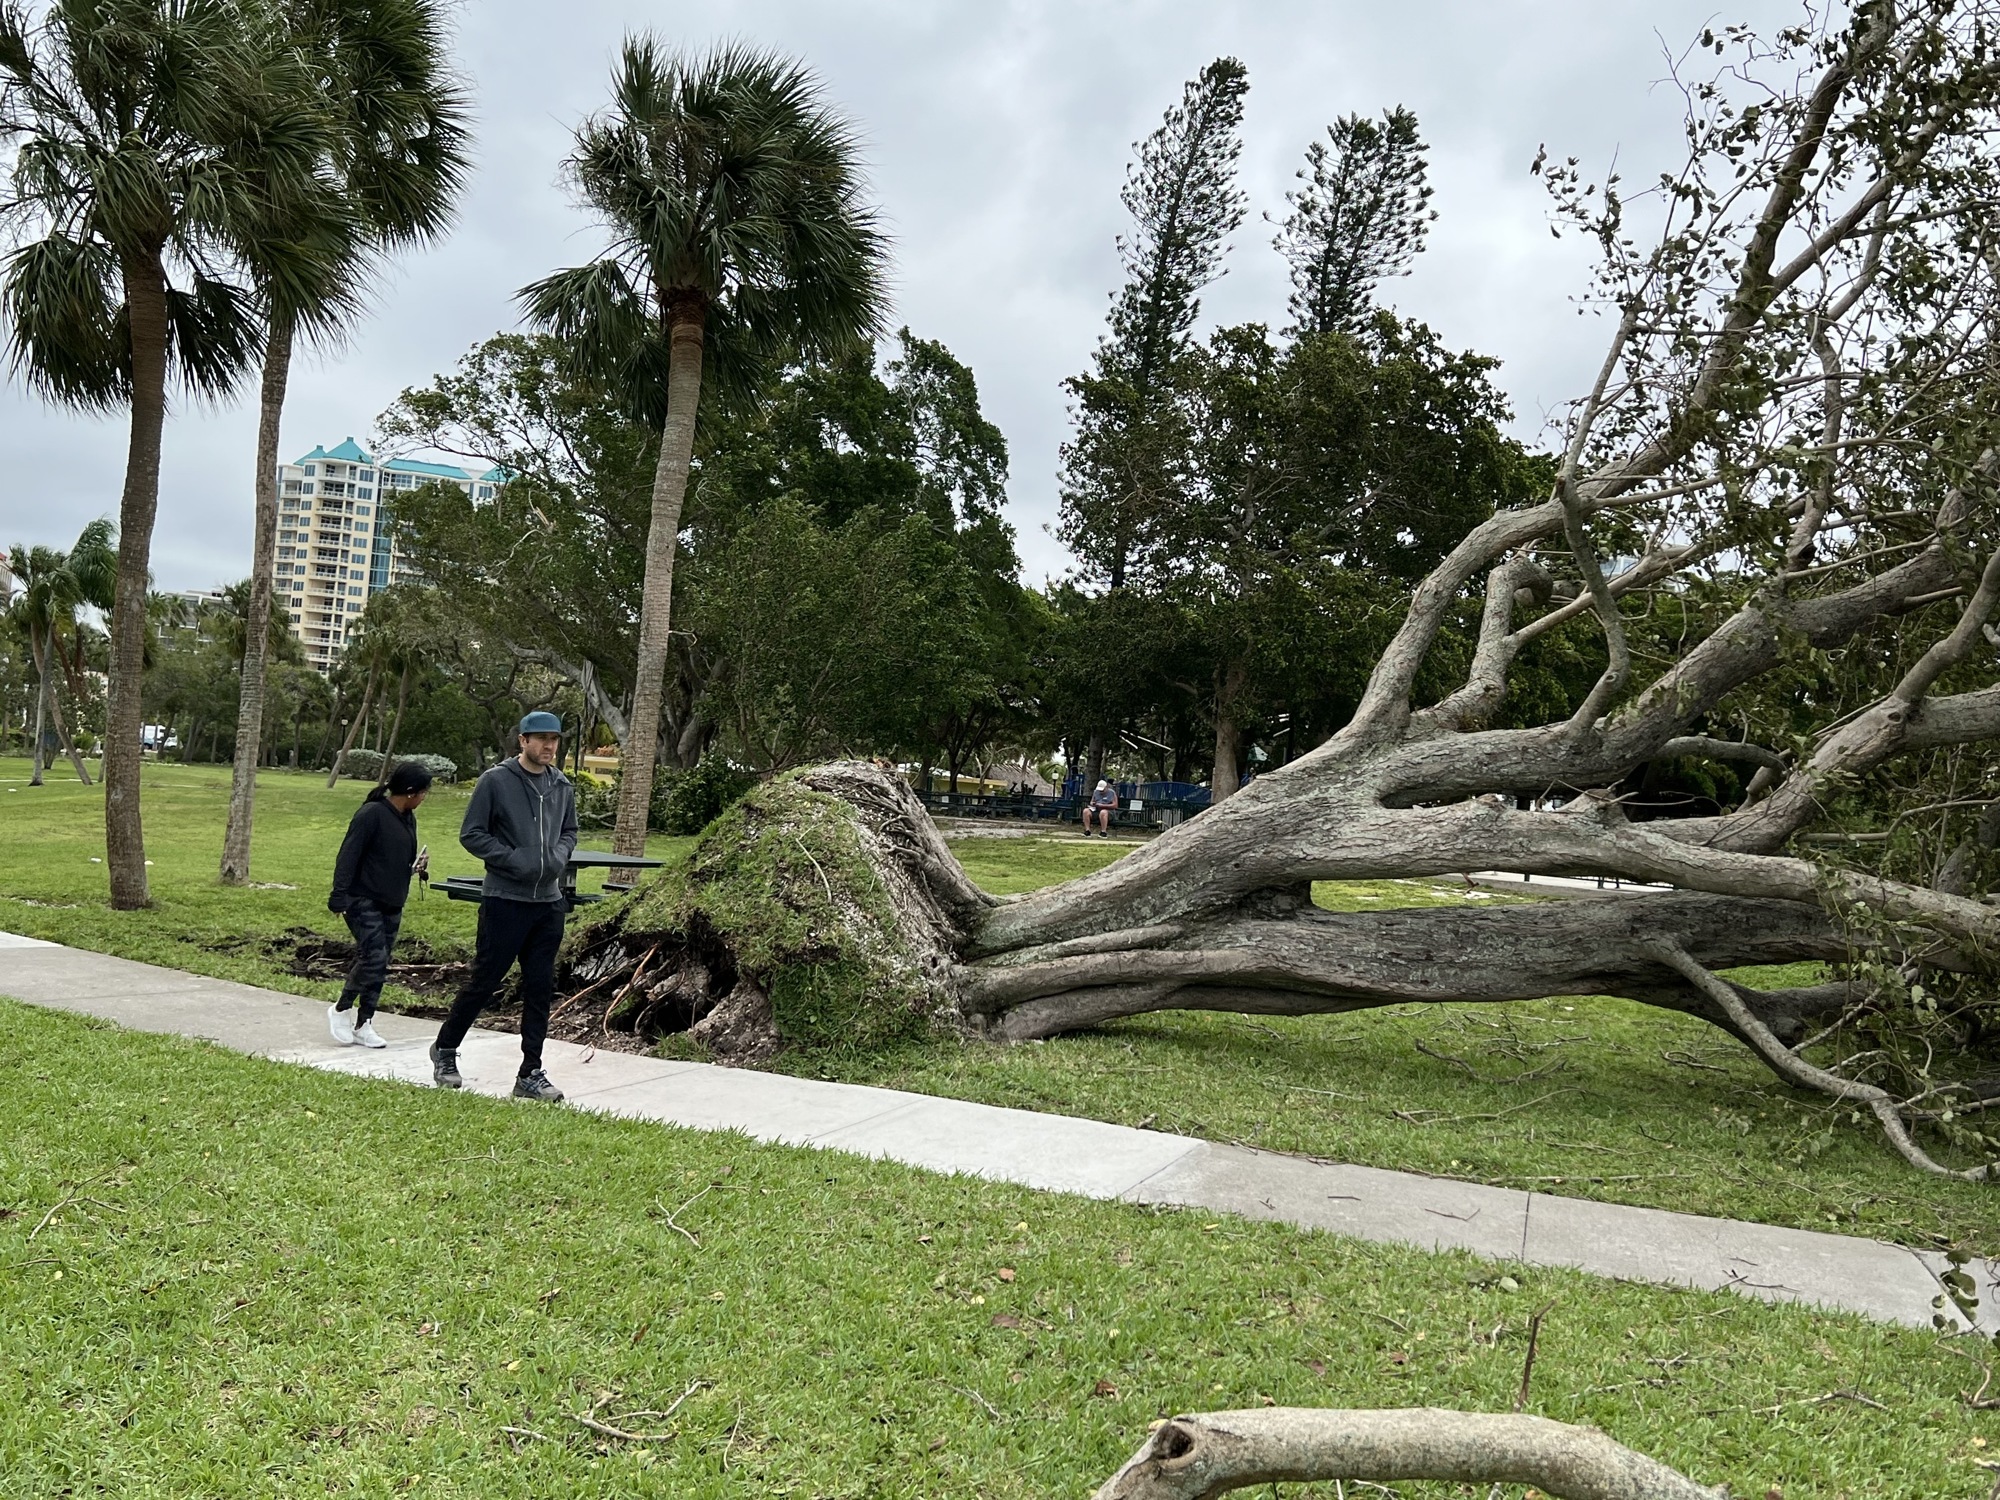 Alan and Kayla Zak walk by a downed tree in Sarasota's Bayfront Park. They rode out the storm in Sarasota with their three kids. They lost power but got it restored around 4 a.m. (Photo by Kat Hughes)